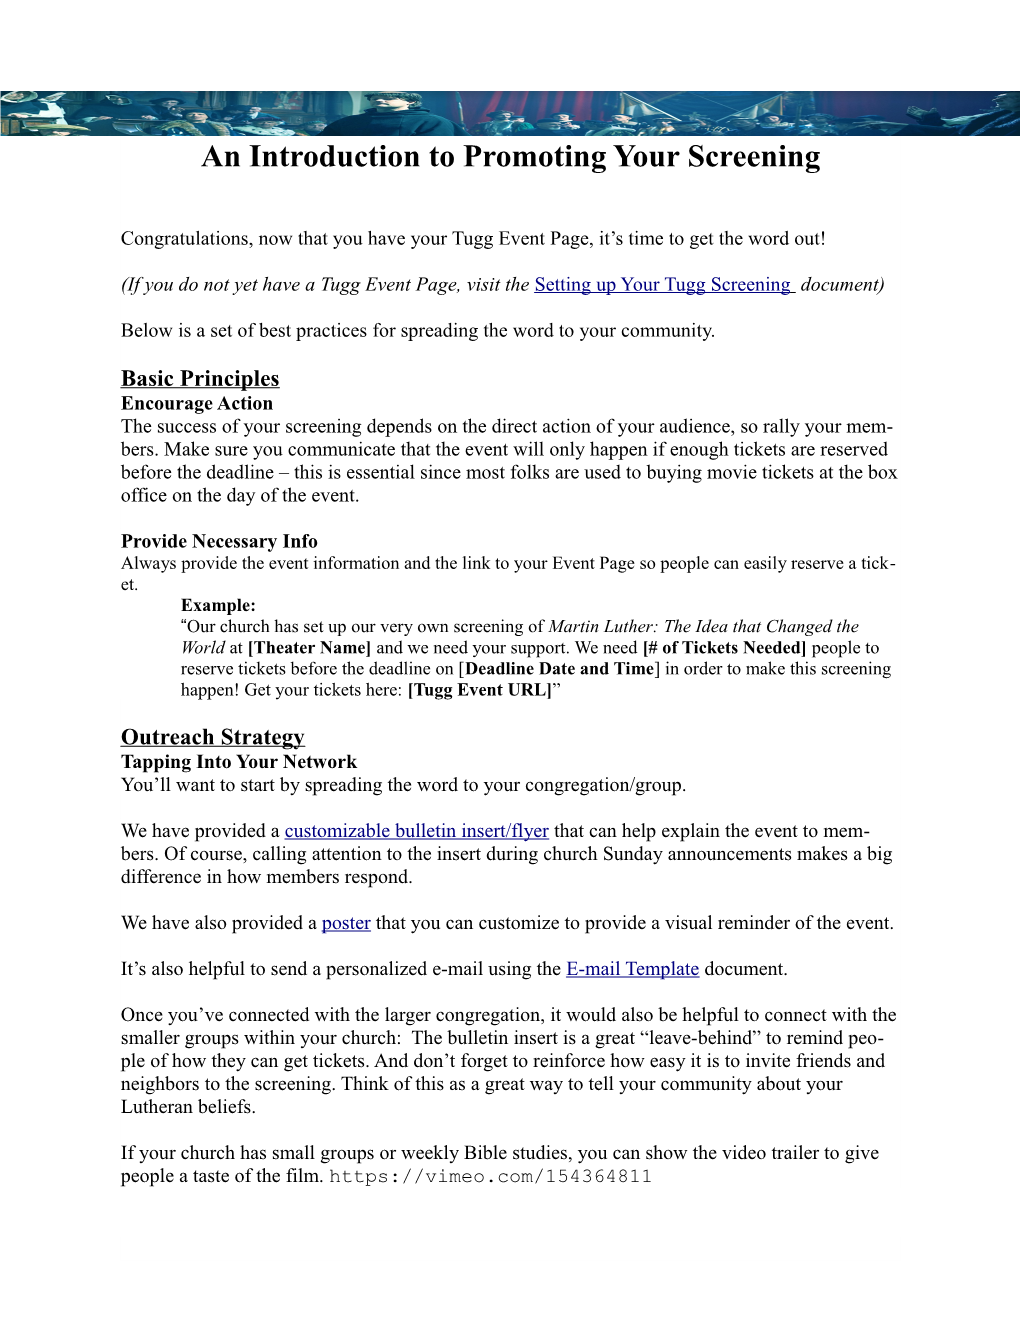 An Introduction to Promoting Your Screening